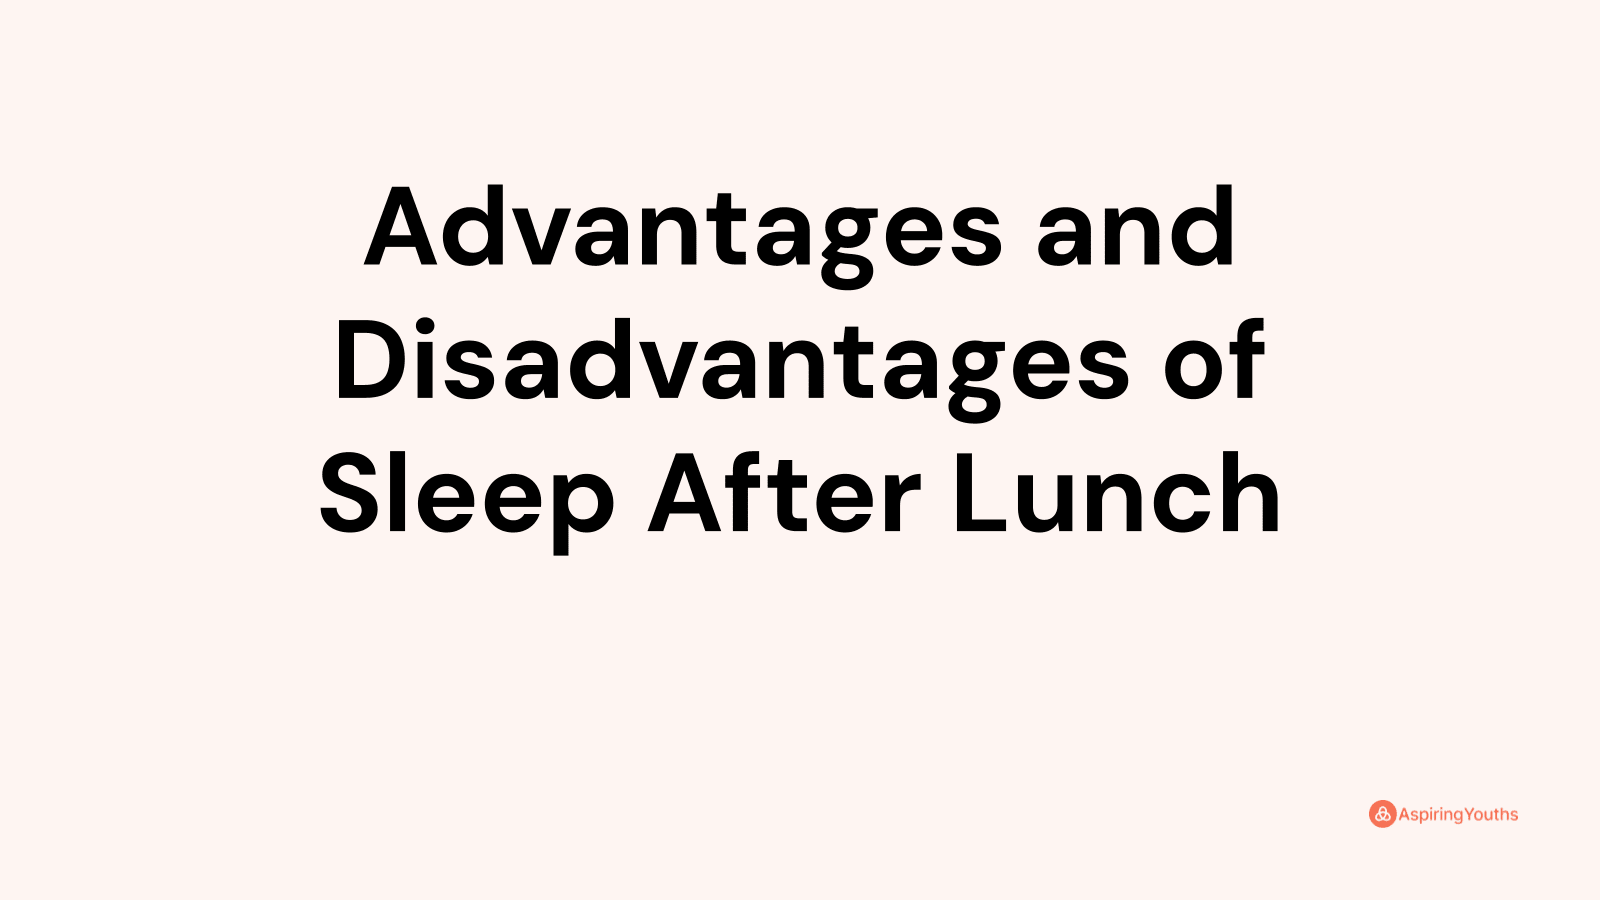 Advantages and disadvantages of Sleep After Lunch